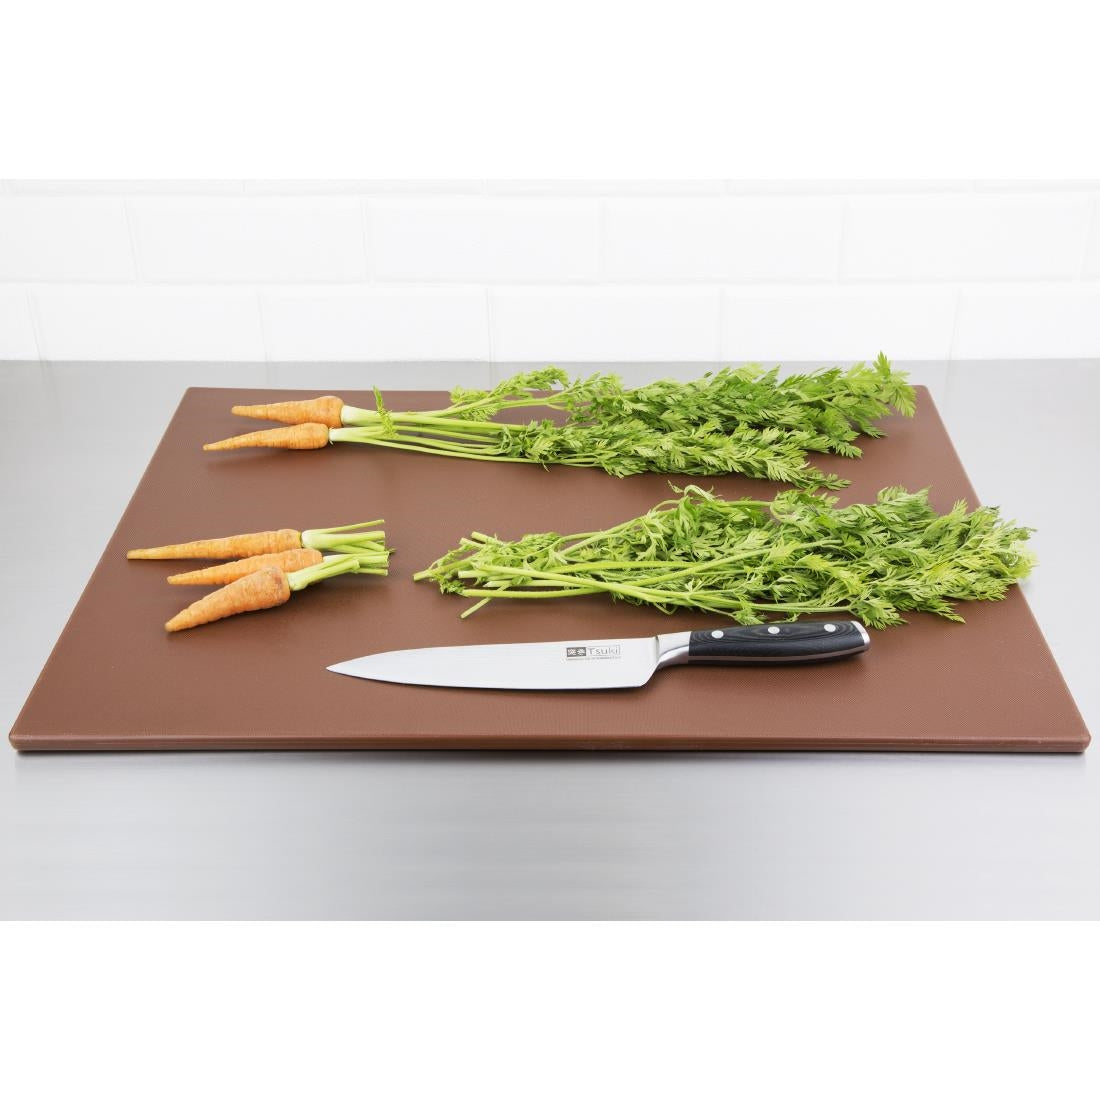 Hygiplas Low Density Brown Chopping Board Large JD Catering Equipment Solutions Ltd